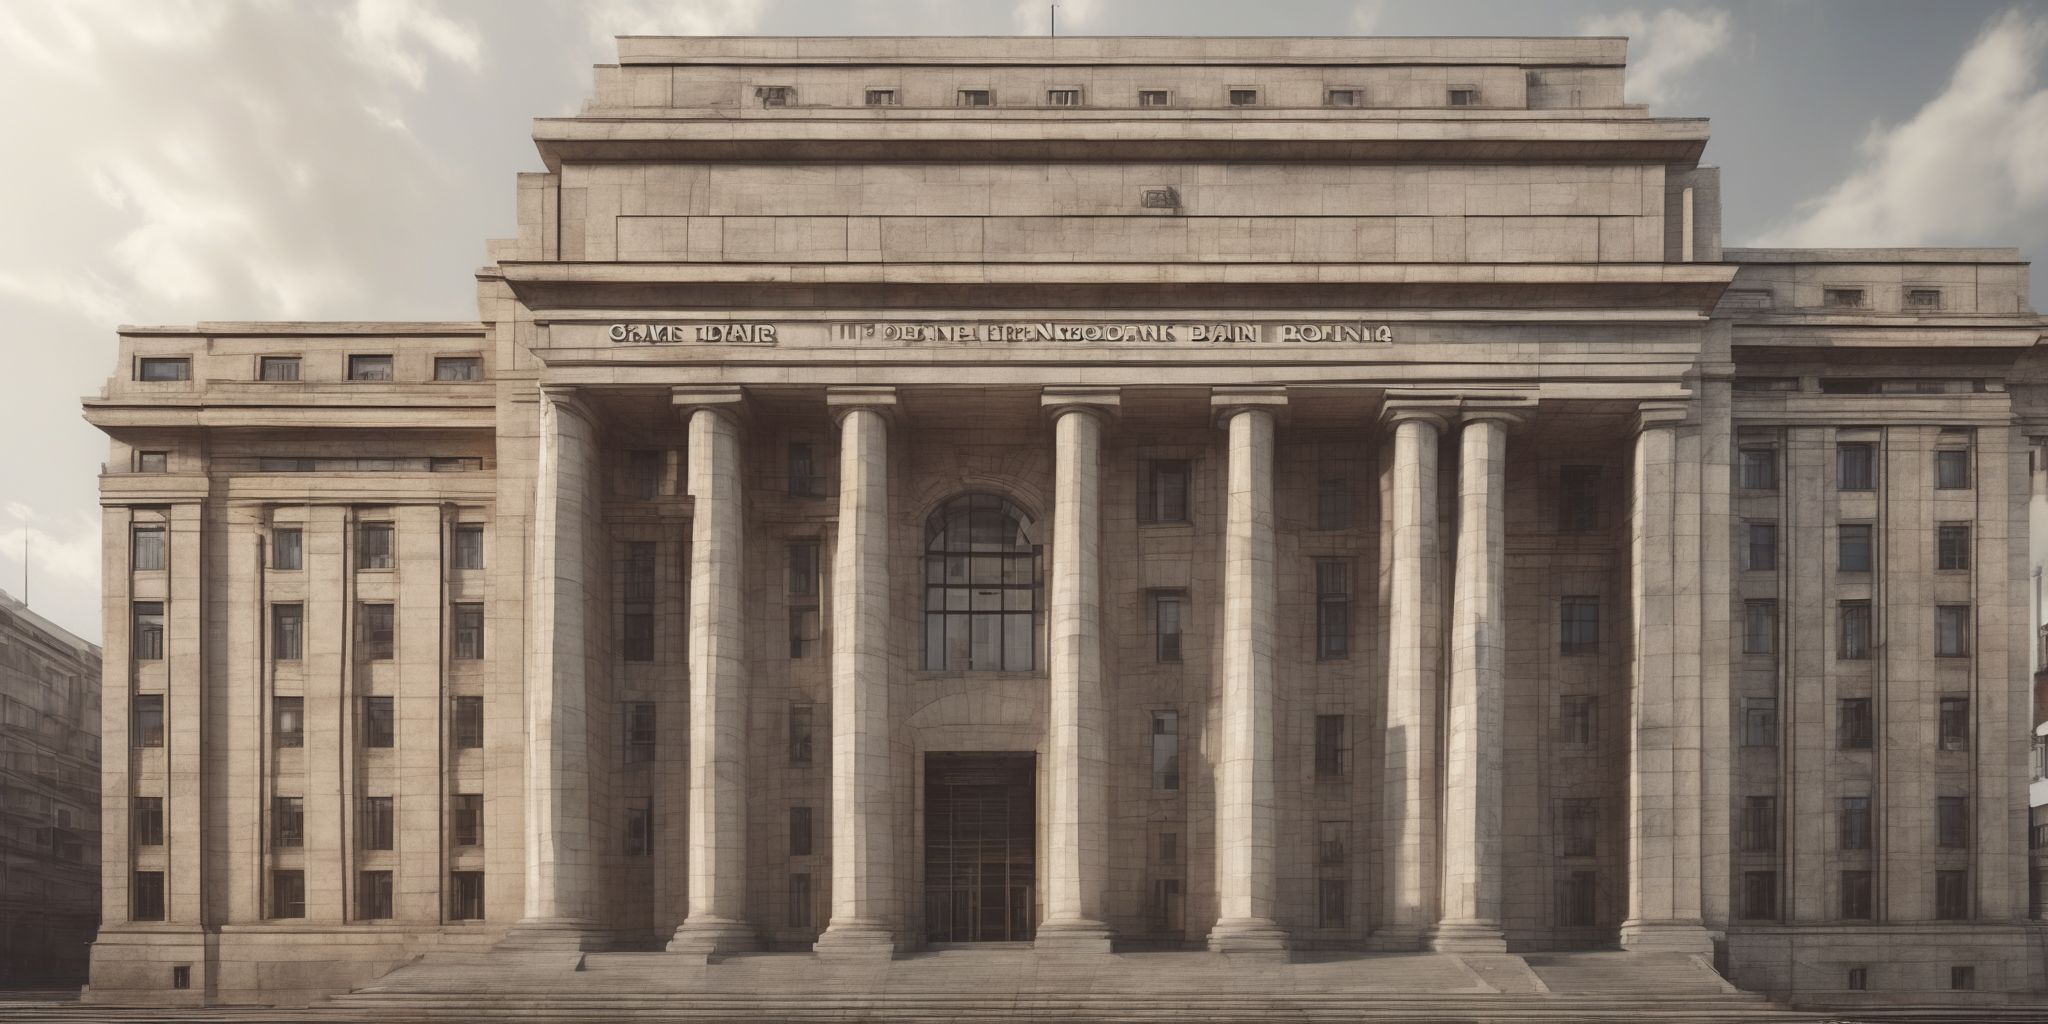 Central bank  in realistic, photographic style